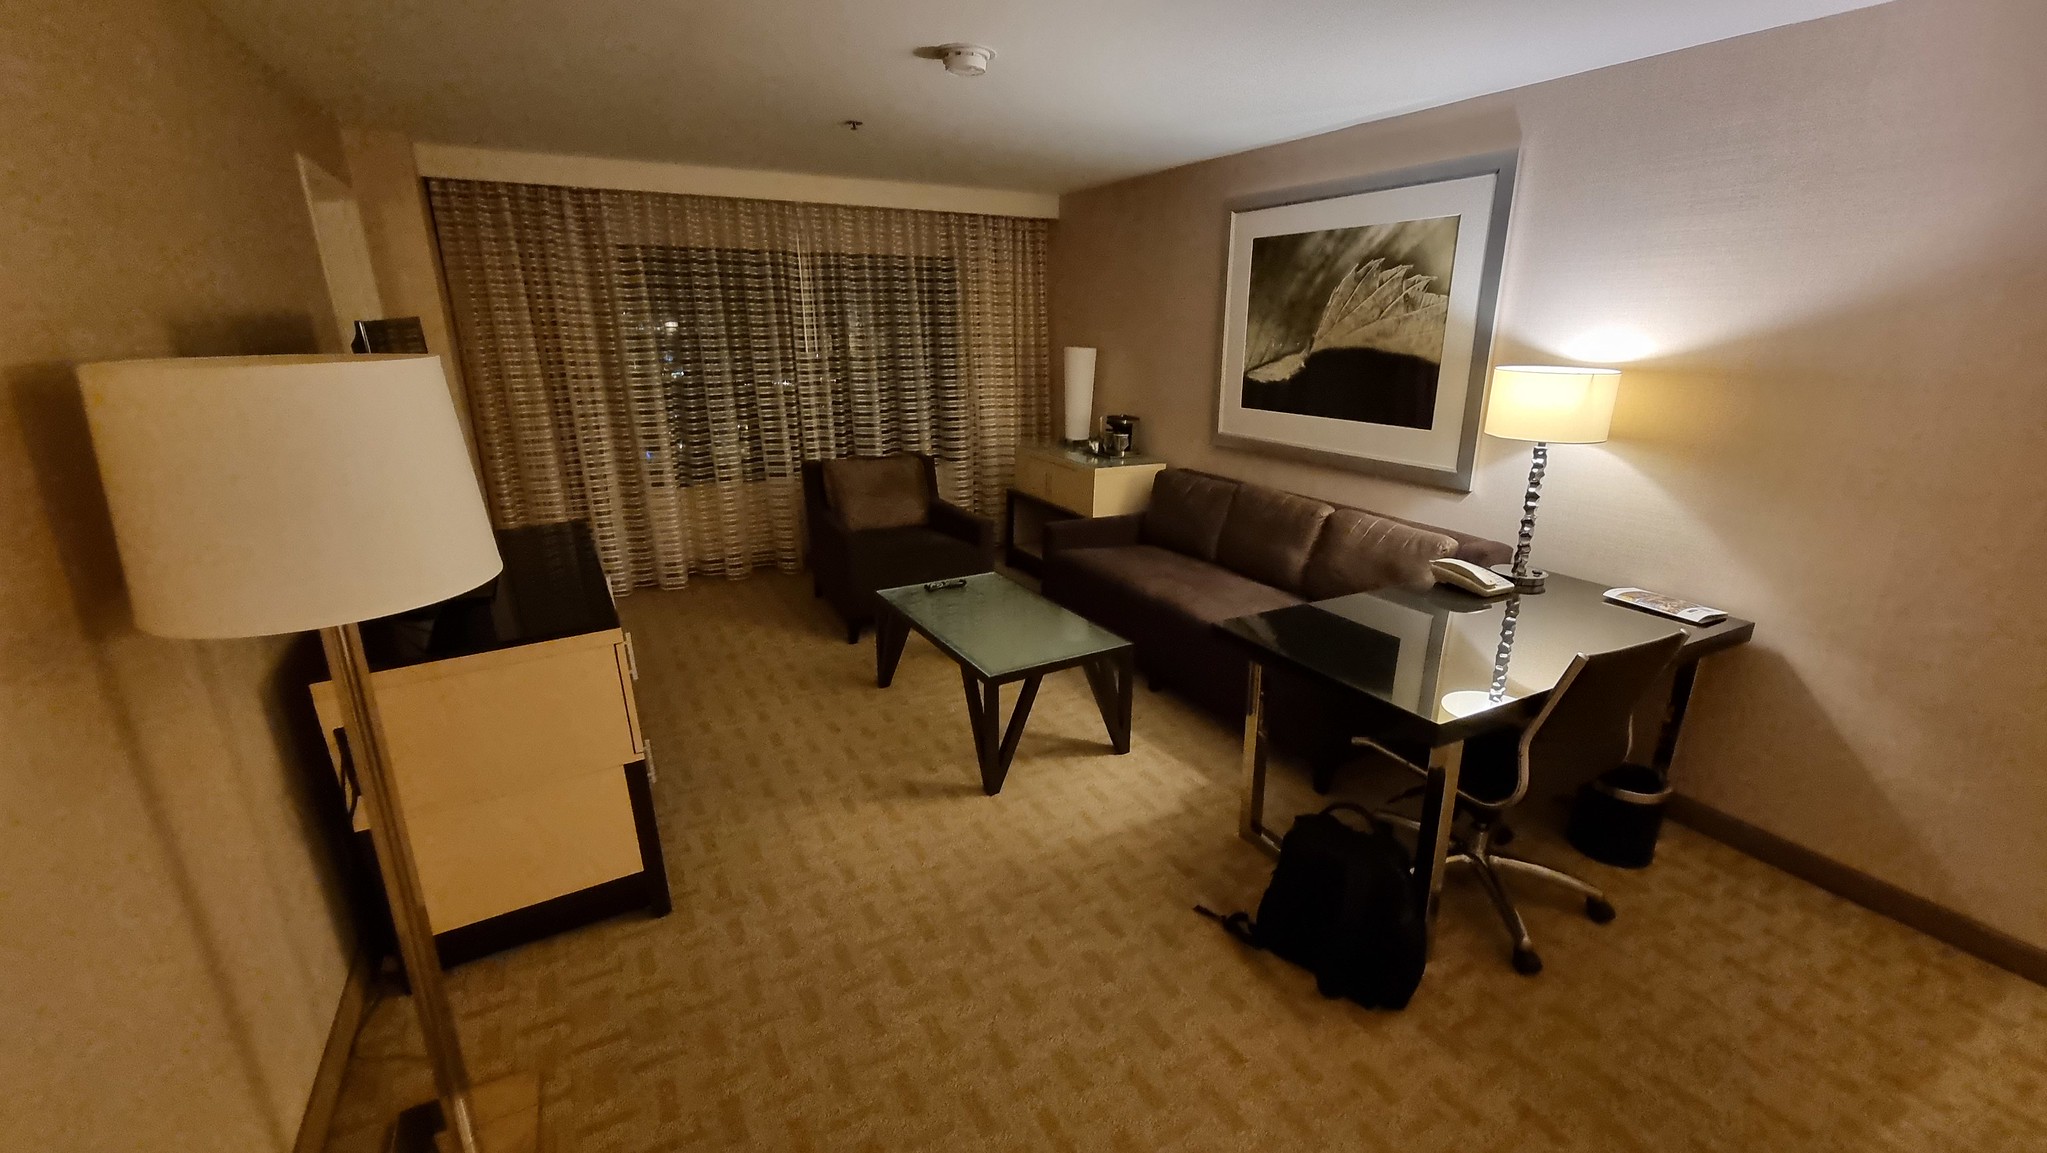 The lounge area in my room at the Hilton LAX